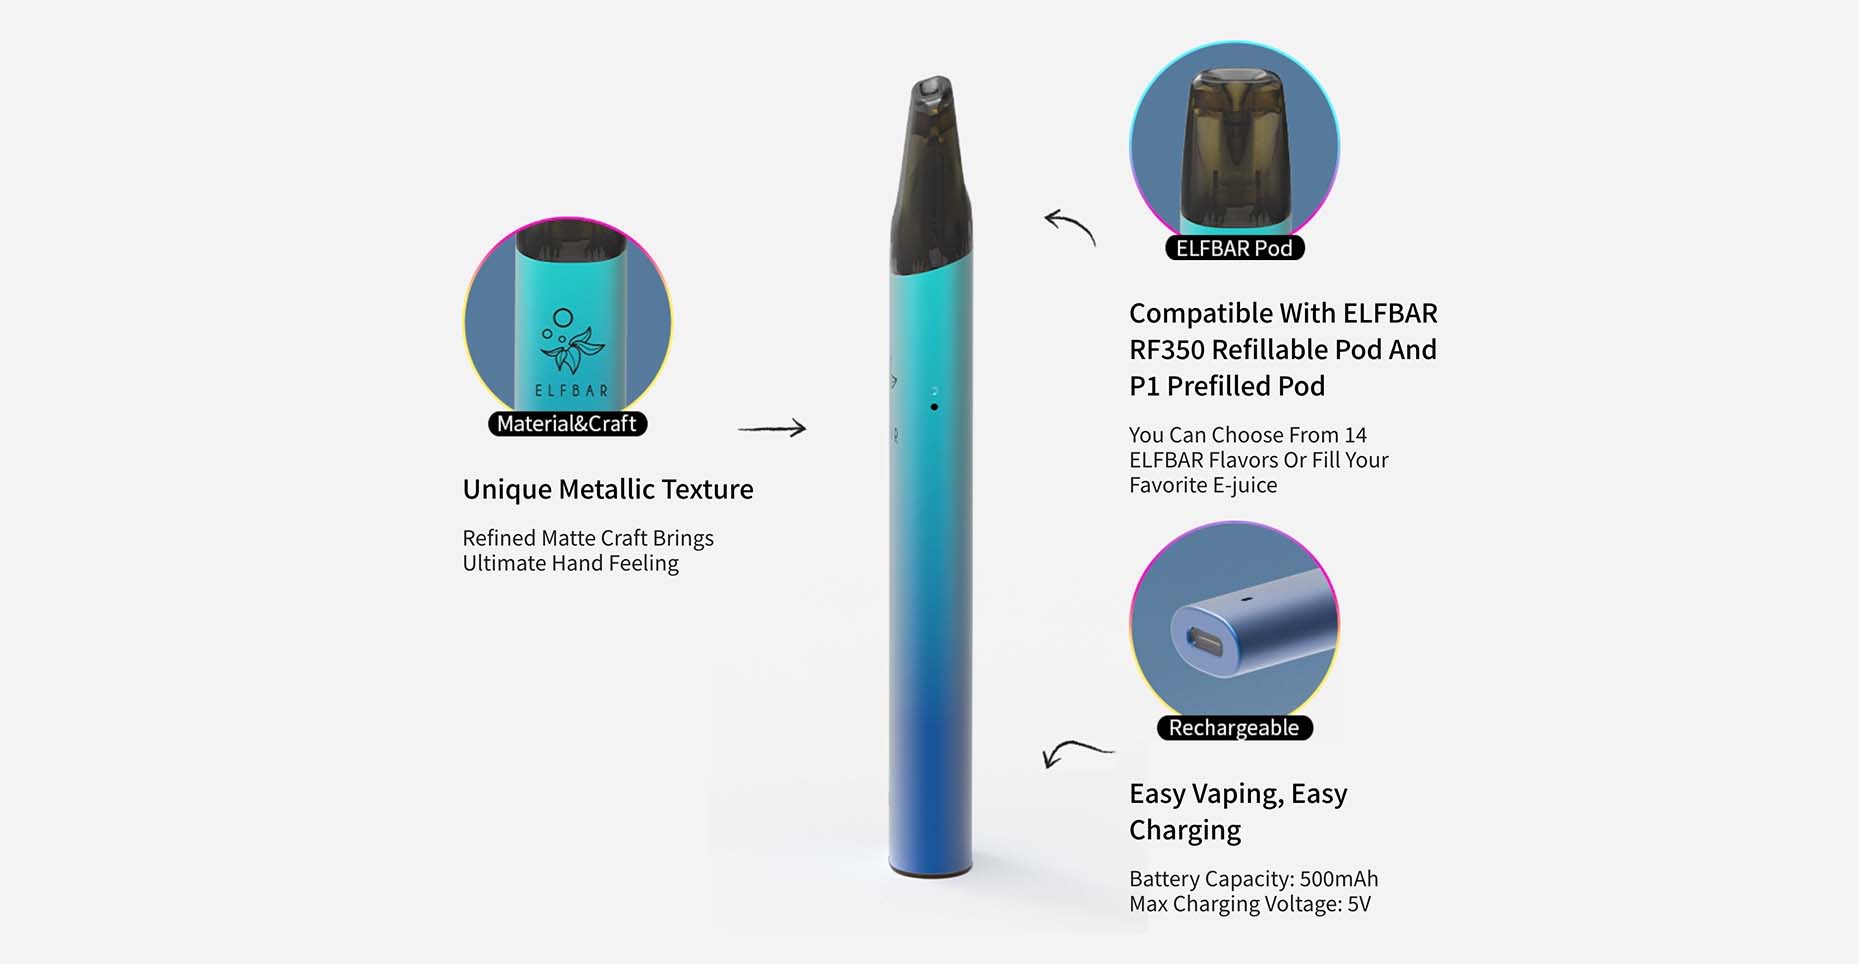 Mate 500 Vape Device by Elf Bar Features